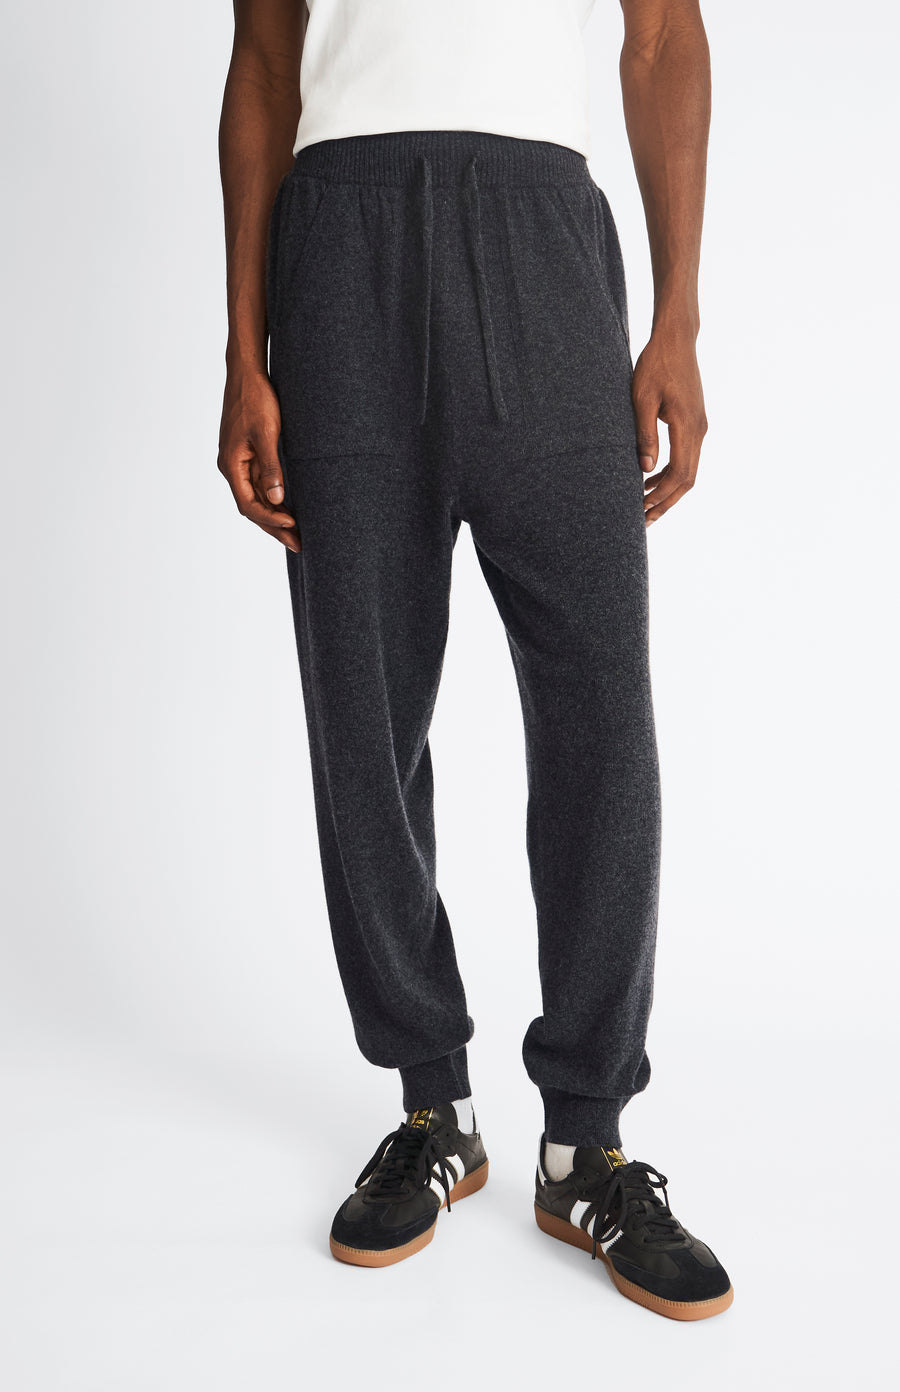 Pringle of Scotland Men's Knitted Merino Cashmere Joggers In Charcoal